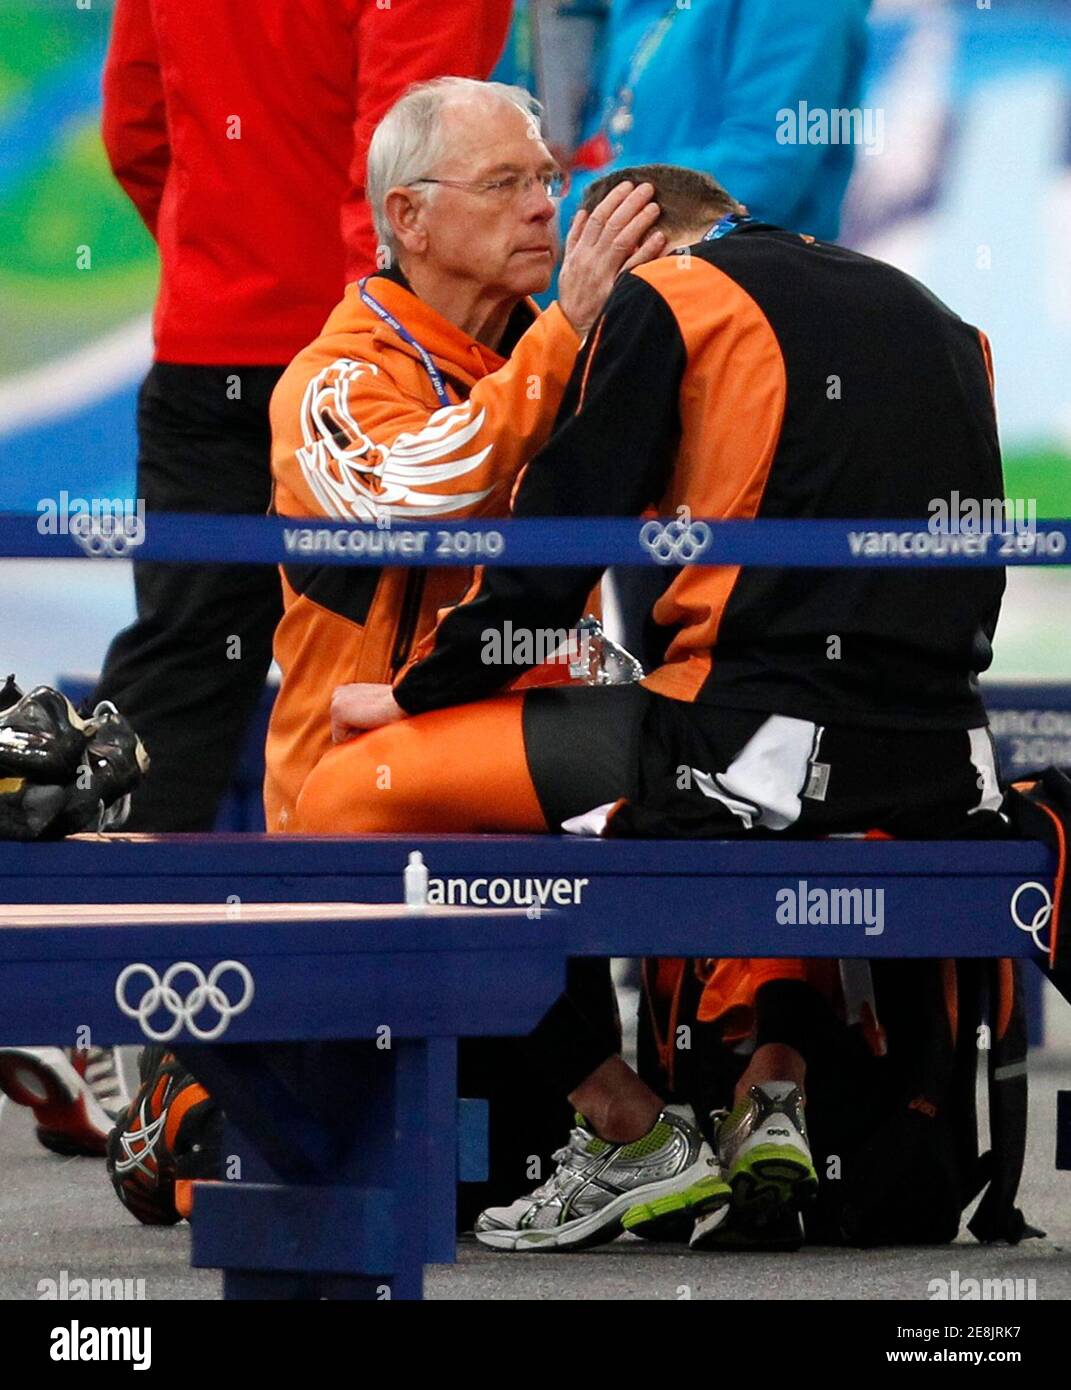 Sven Kramer (R) of the Netherlands is comforted by former Dutch national speed skating coach Henk Gemser after his disqualification in the men's 10000 metres race at the Richmond Olympic Oval during the Vancouver 2010 Winter Olympics February 23, 2010.     REUTERS/Jerry Lampen (CANADA) Stock Photo